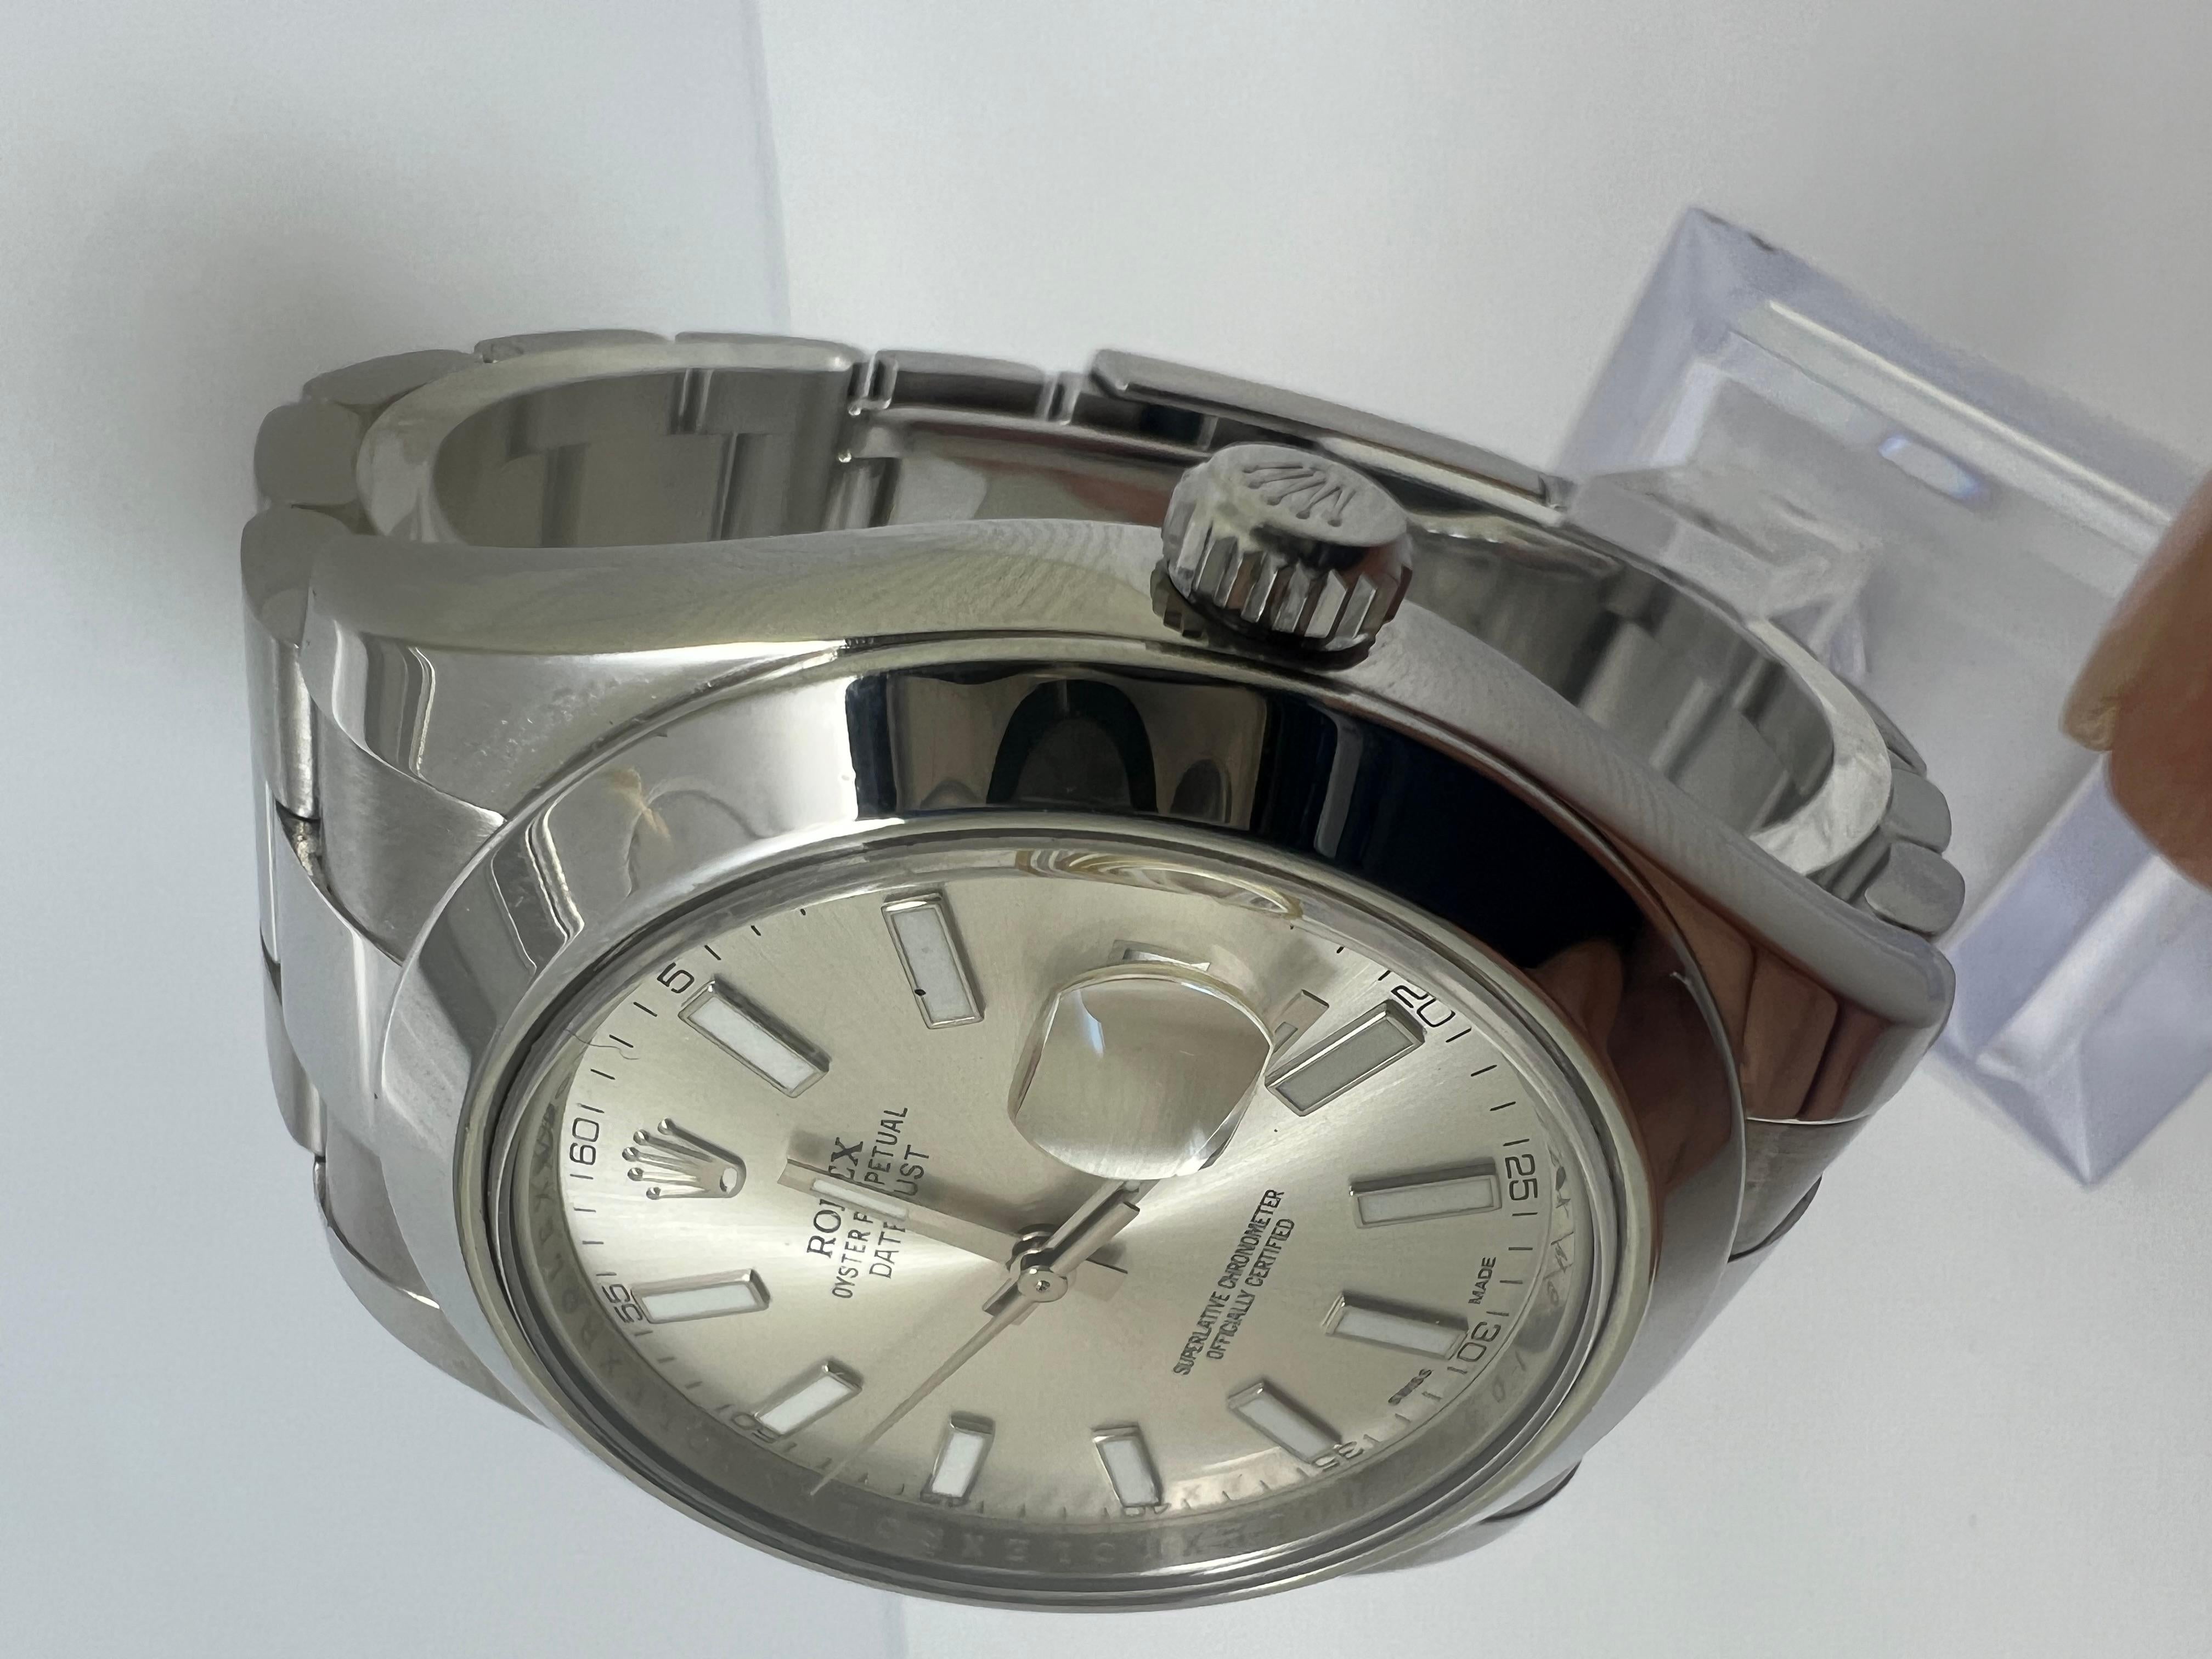 Rolex Datejust II Silver Men's Watch - 116300

excellent condition

all original Rolex parts!

comes with Rolex Box and certificate

free overnight shipping

shop with confidence 

Evita Diamonds